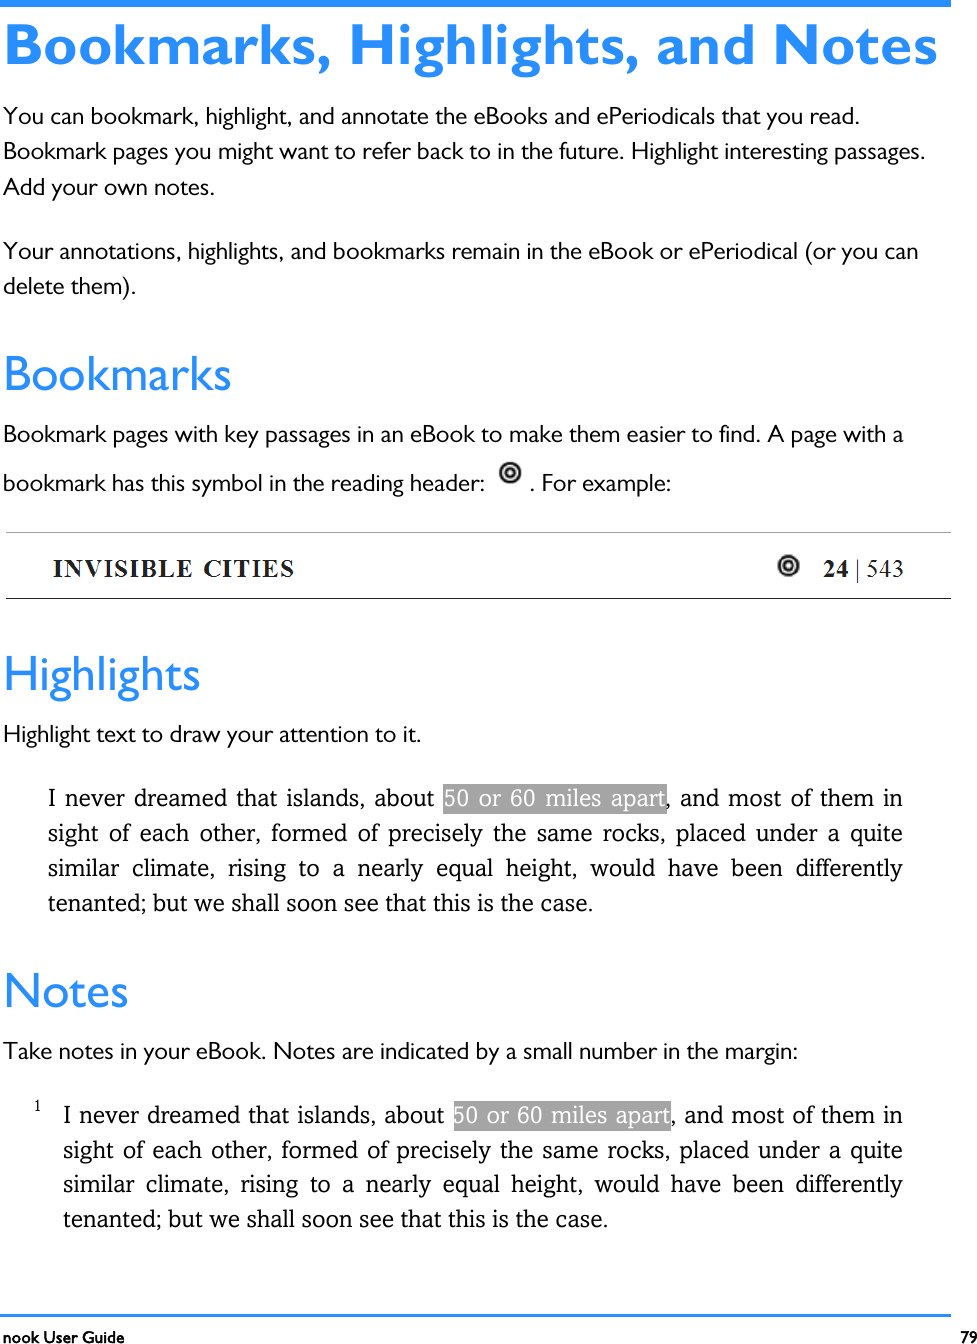  nook User Guide    79          Bookmarks, Highlights, and Notes You can bookmark, highlight, and annotate the eBooks and ePeriodicals that you read. Bookmark pages you might want to refer back to in the future. Highlight interesting passages. Add your own notes. Your annotations, highlights, and bookmarks remain in the eBook or ePeriodical (or you can delete them). Bookmarks Bookmark pages with key passages in an eBook to make them easier to find. A page with a bookmark has this symbol in the reading header:  . For example:  Highlights Highlight text to draw your attention to it. I never dreamed that islands, about 50 or 60  miles apart, and most of them in sight of each other,  formed of precisely the same rocks, placed under a quite similar climate, rising to a nearly equal height, would have been differently tenanted; but we shall soon see that this is the case. Notes Take notes in your eBook. Notes are indicated by a small number in the margin: 1 I never dreamed that islands, about 50 or 60 miles apart, and most of them in sight of each other, formed of precisely the same rocks, placed under a quite similar climate, rising to a nearly equal height, would have been differently tenanted; but we shall soon see that this is the case. 